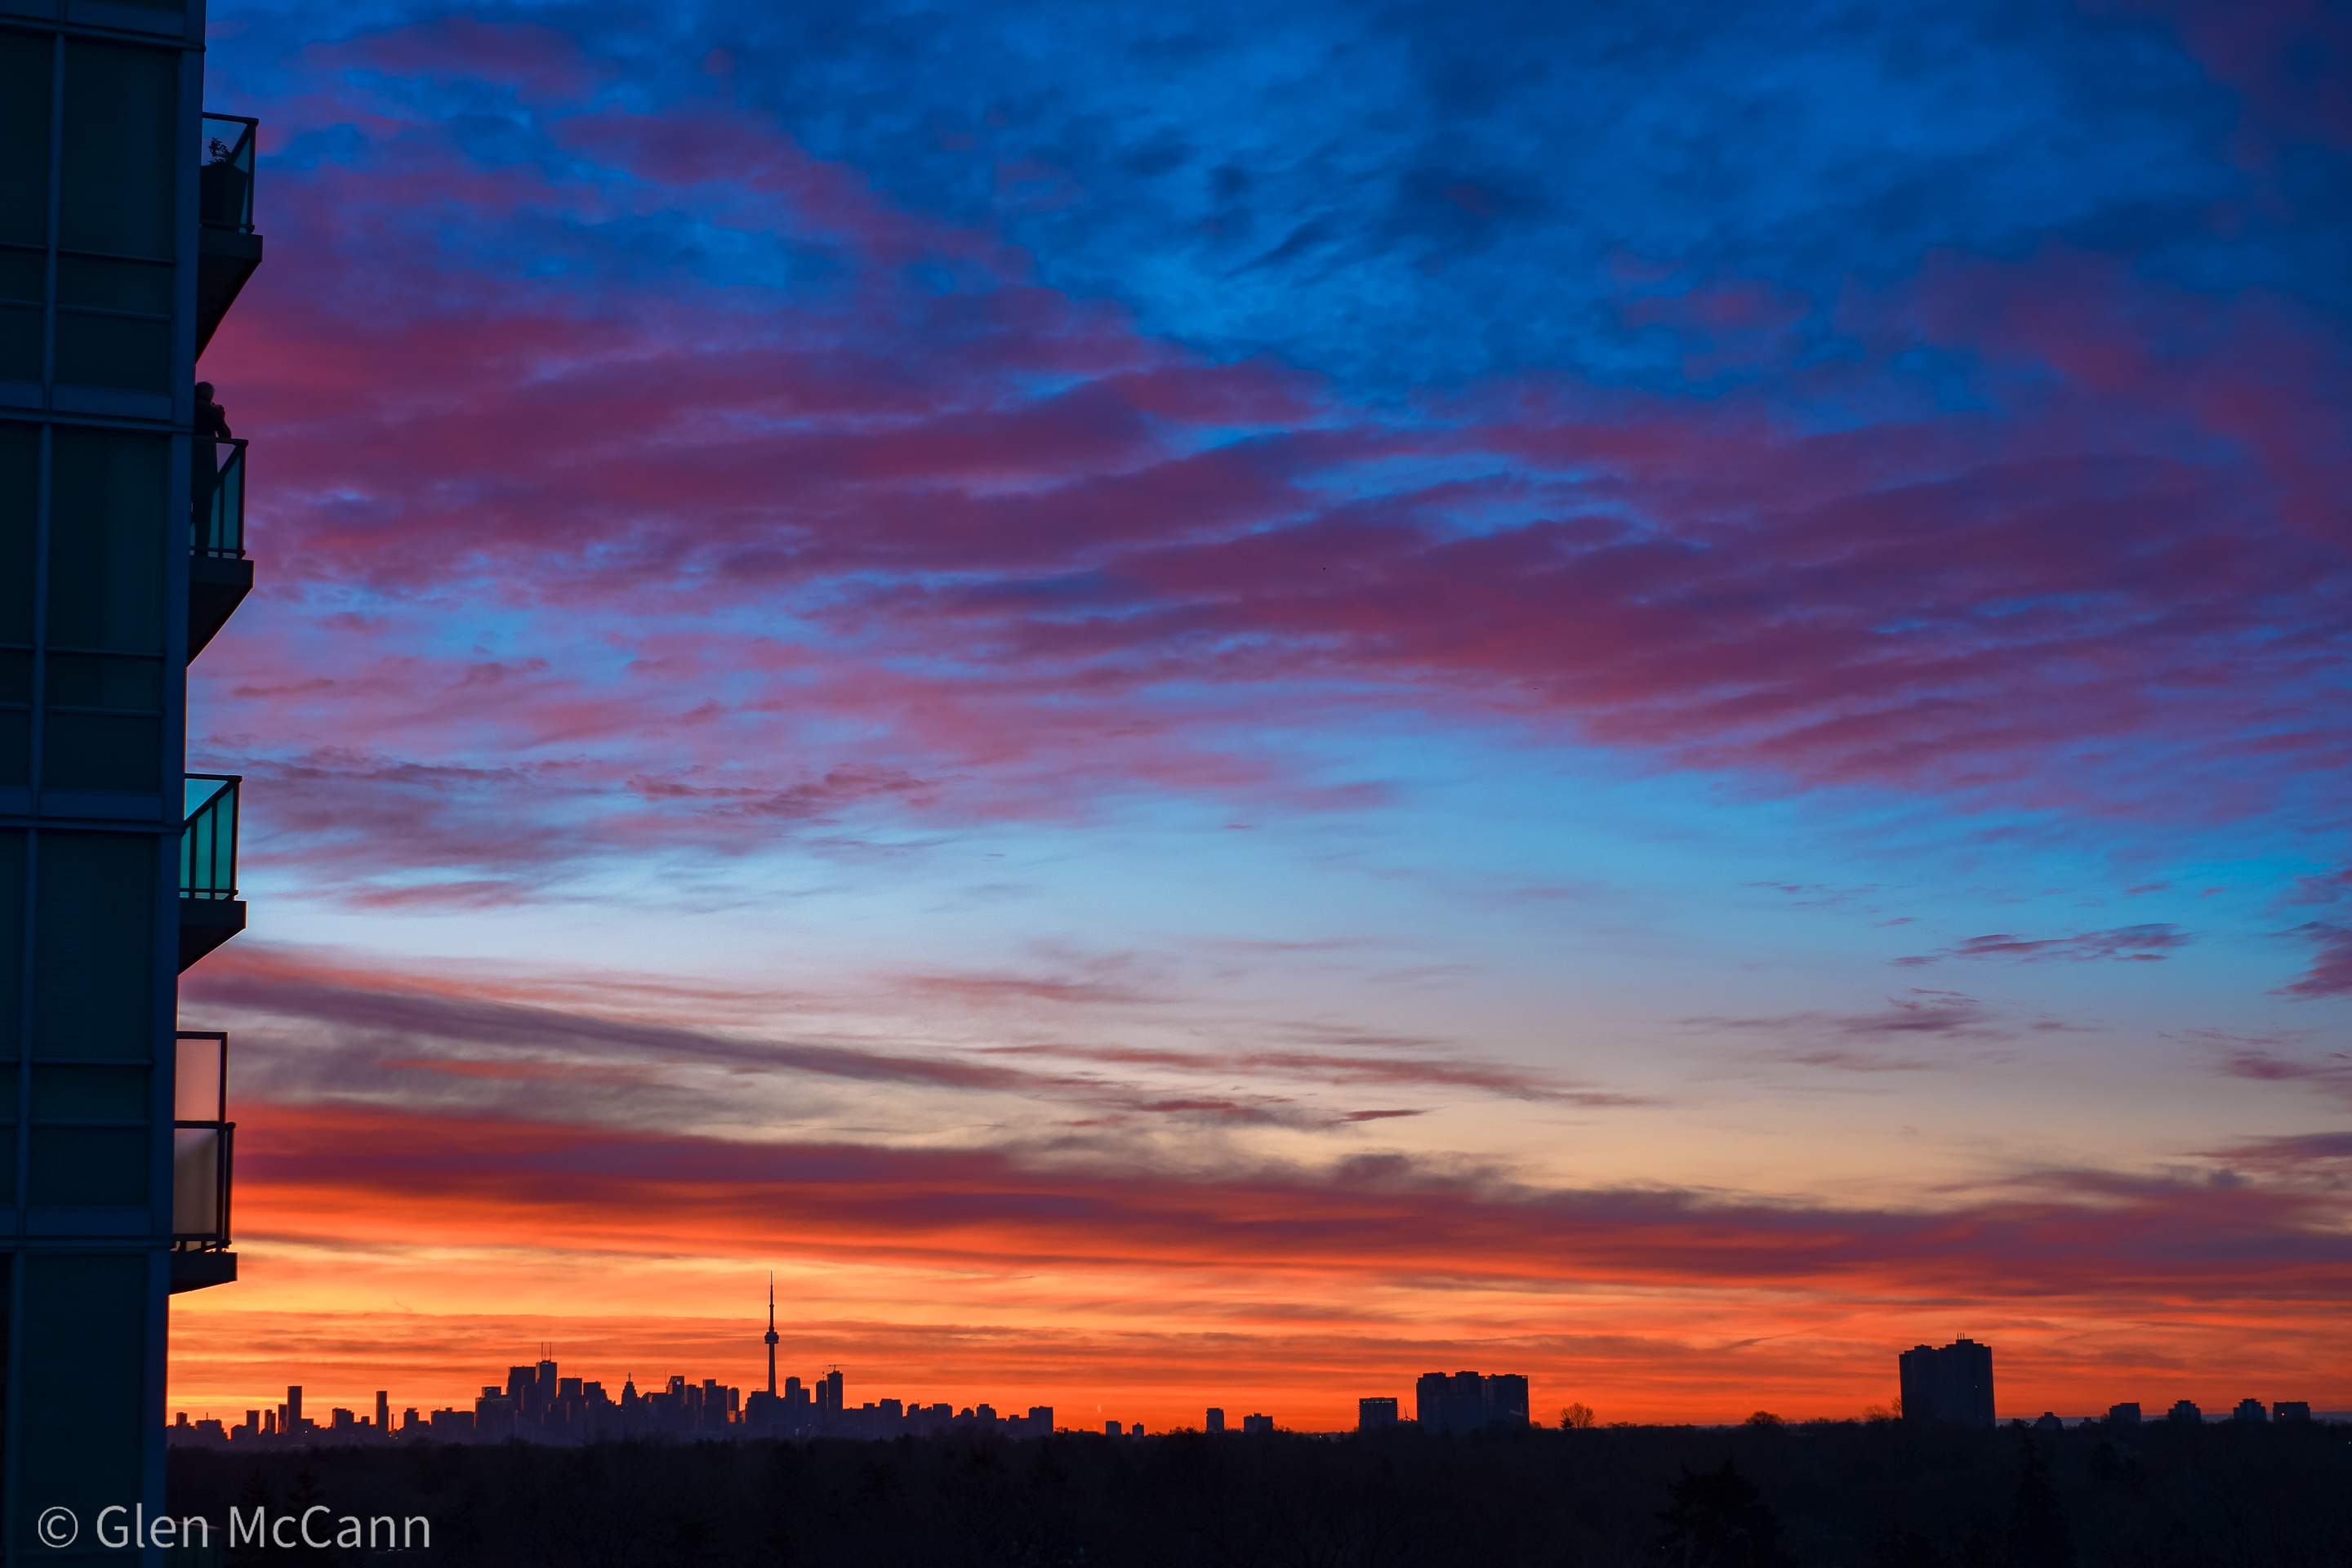 The Toronto skyline during a sunset, viewed from the West and featuring some balconies in the left foreground.